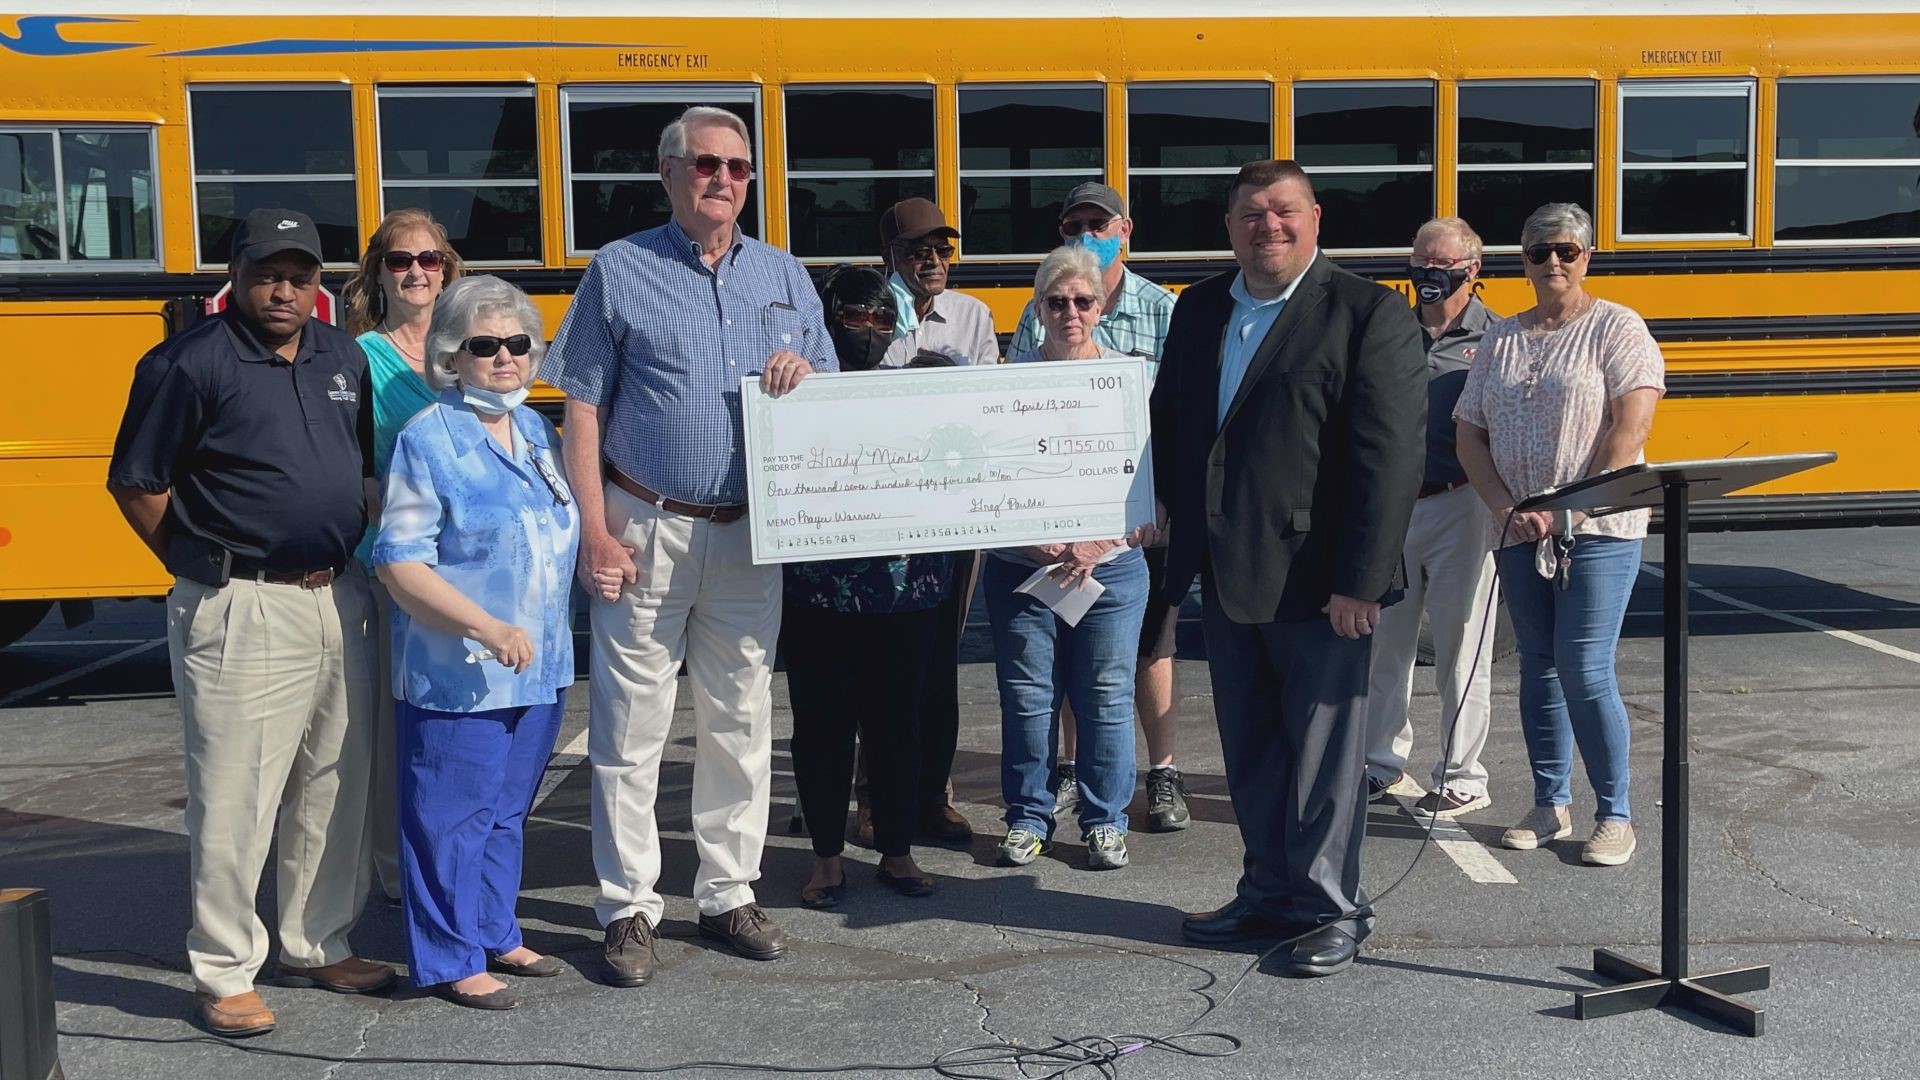 School bus drivers gave some of their bonus money to their former colleague Grady Mimbs to show their appreciation for his morning devotions.